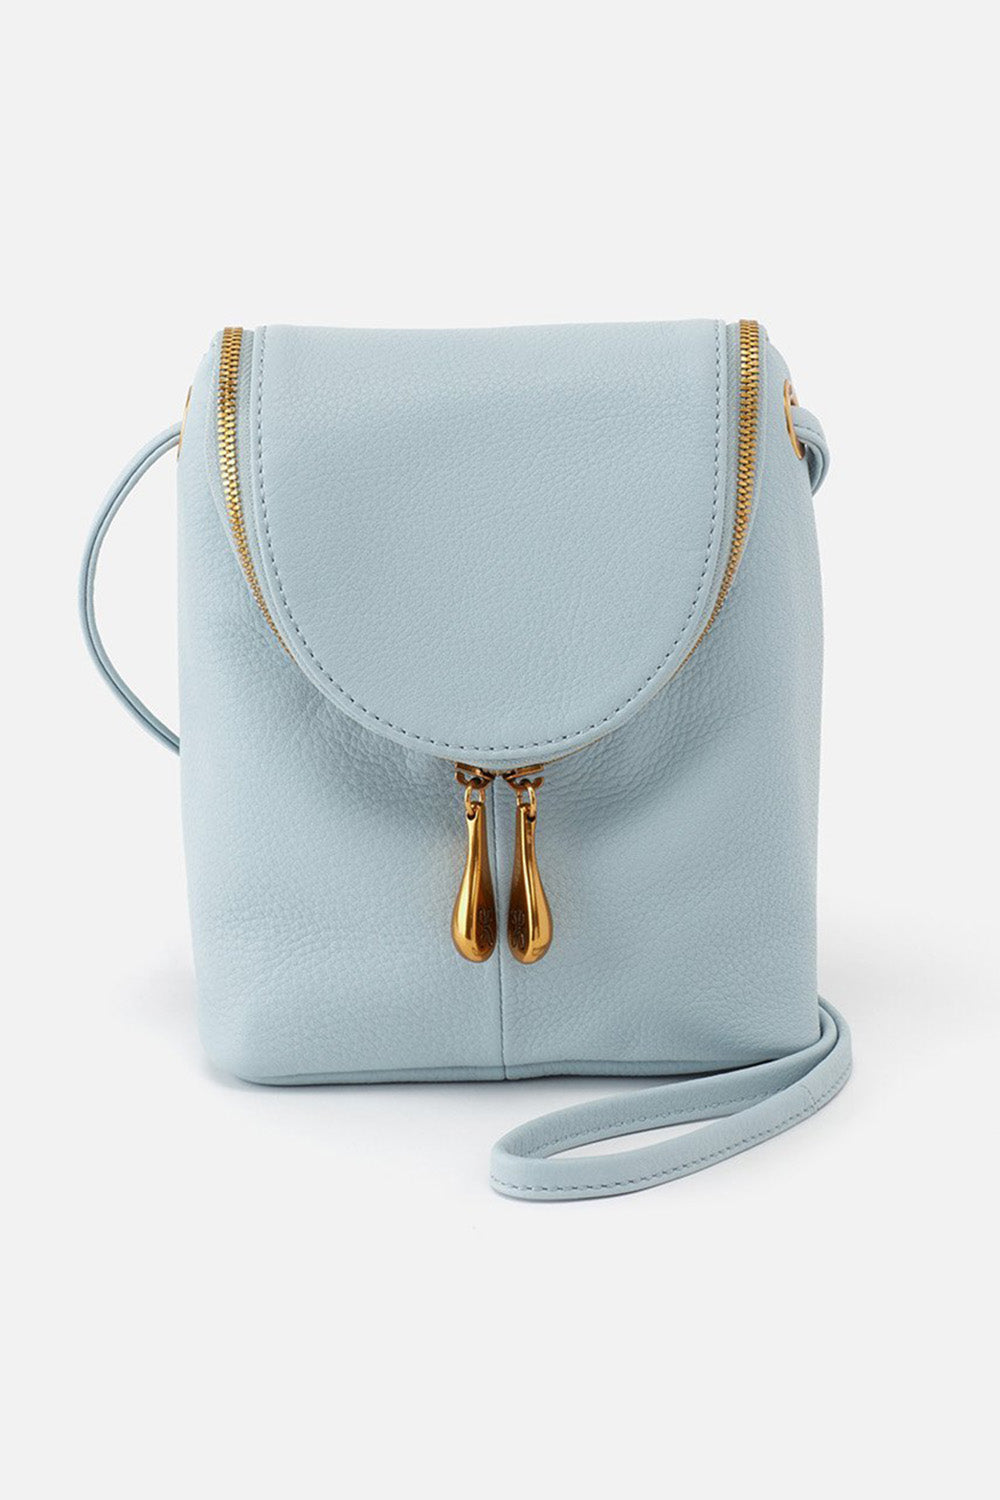 BRAND NEW MICHAEL KORS PALE BLUE LEATHER TOTE PURSE | Leather tote purse,  Leather tote, Blue leather